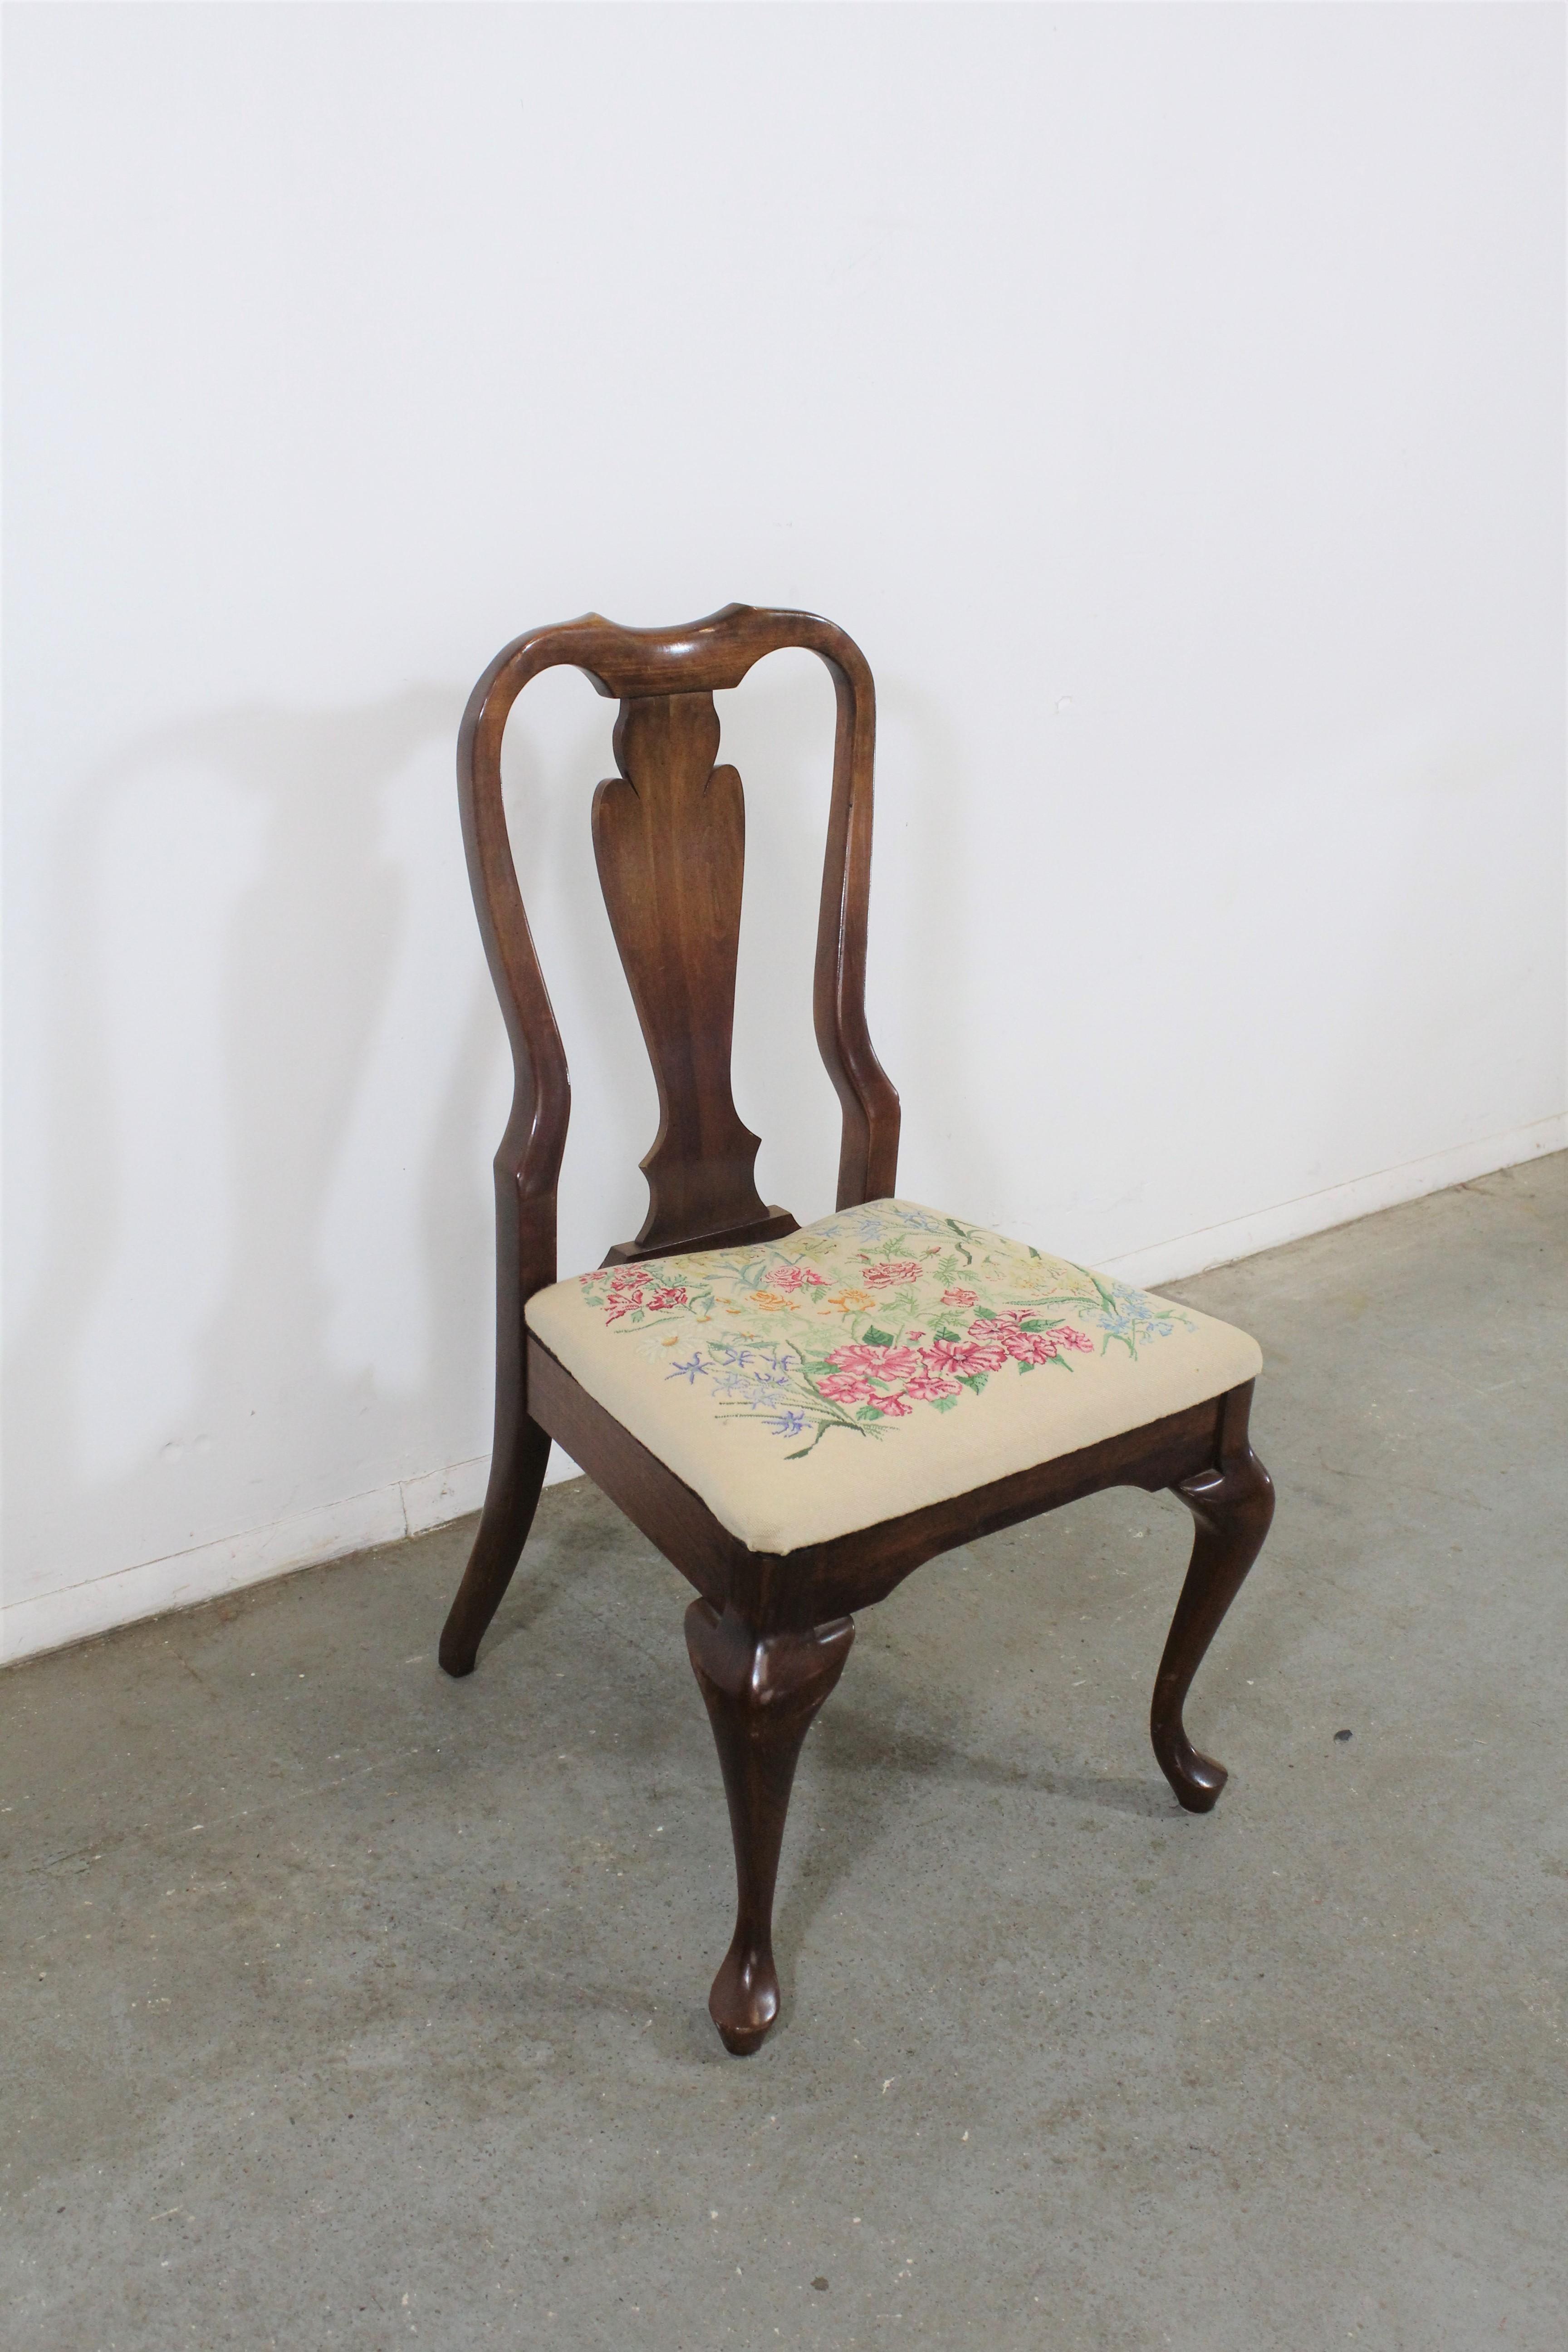 Pair of vintage Queen Anne cherry arm dining chairs

Offered is a vintage Queen Anne side chair. It's made of solid cherry wood and has an adorable stitched floral upholstered seat. In very good condition for its age, with some slight surface